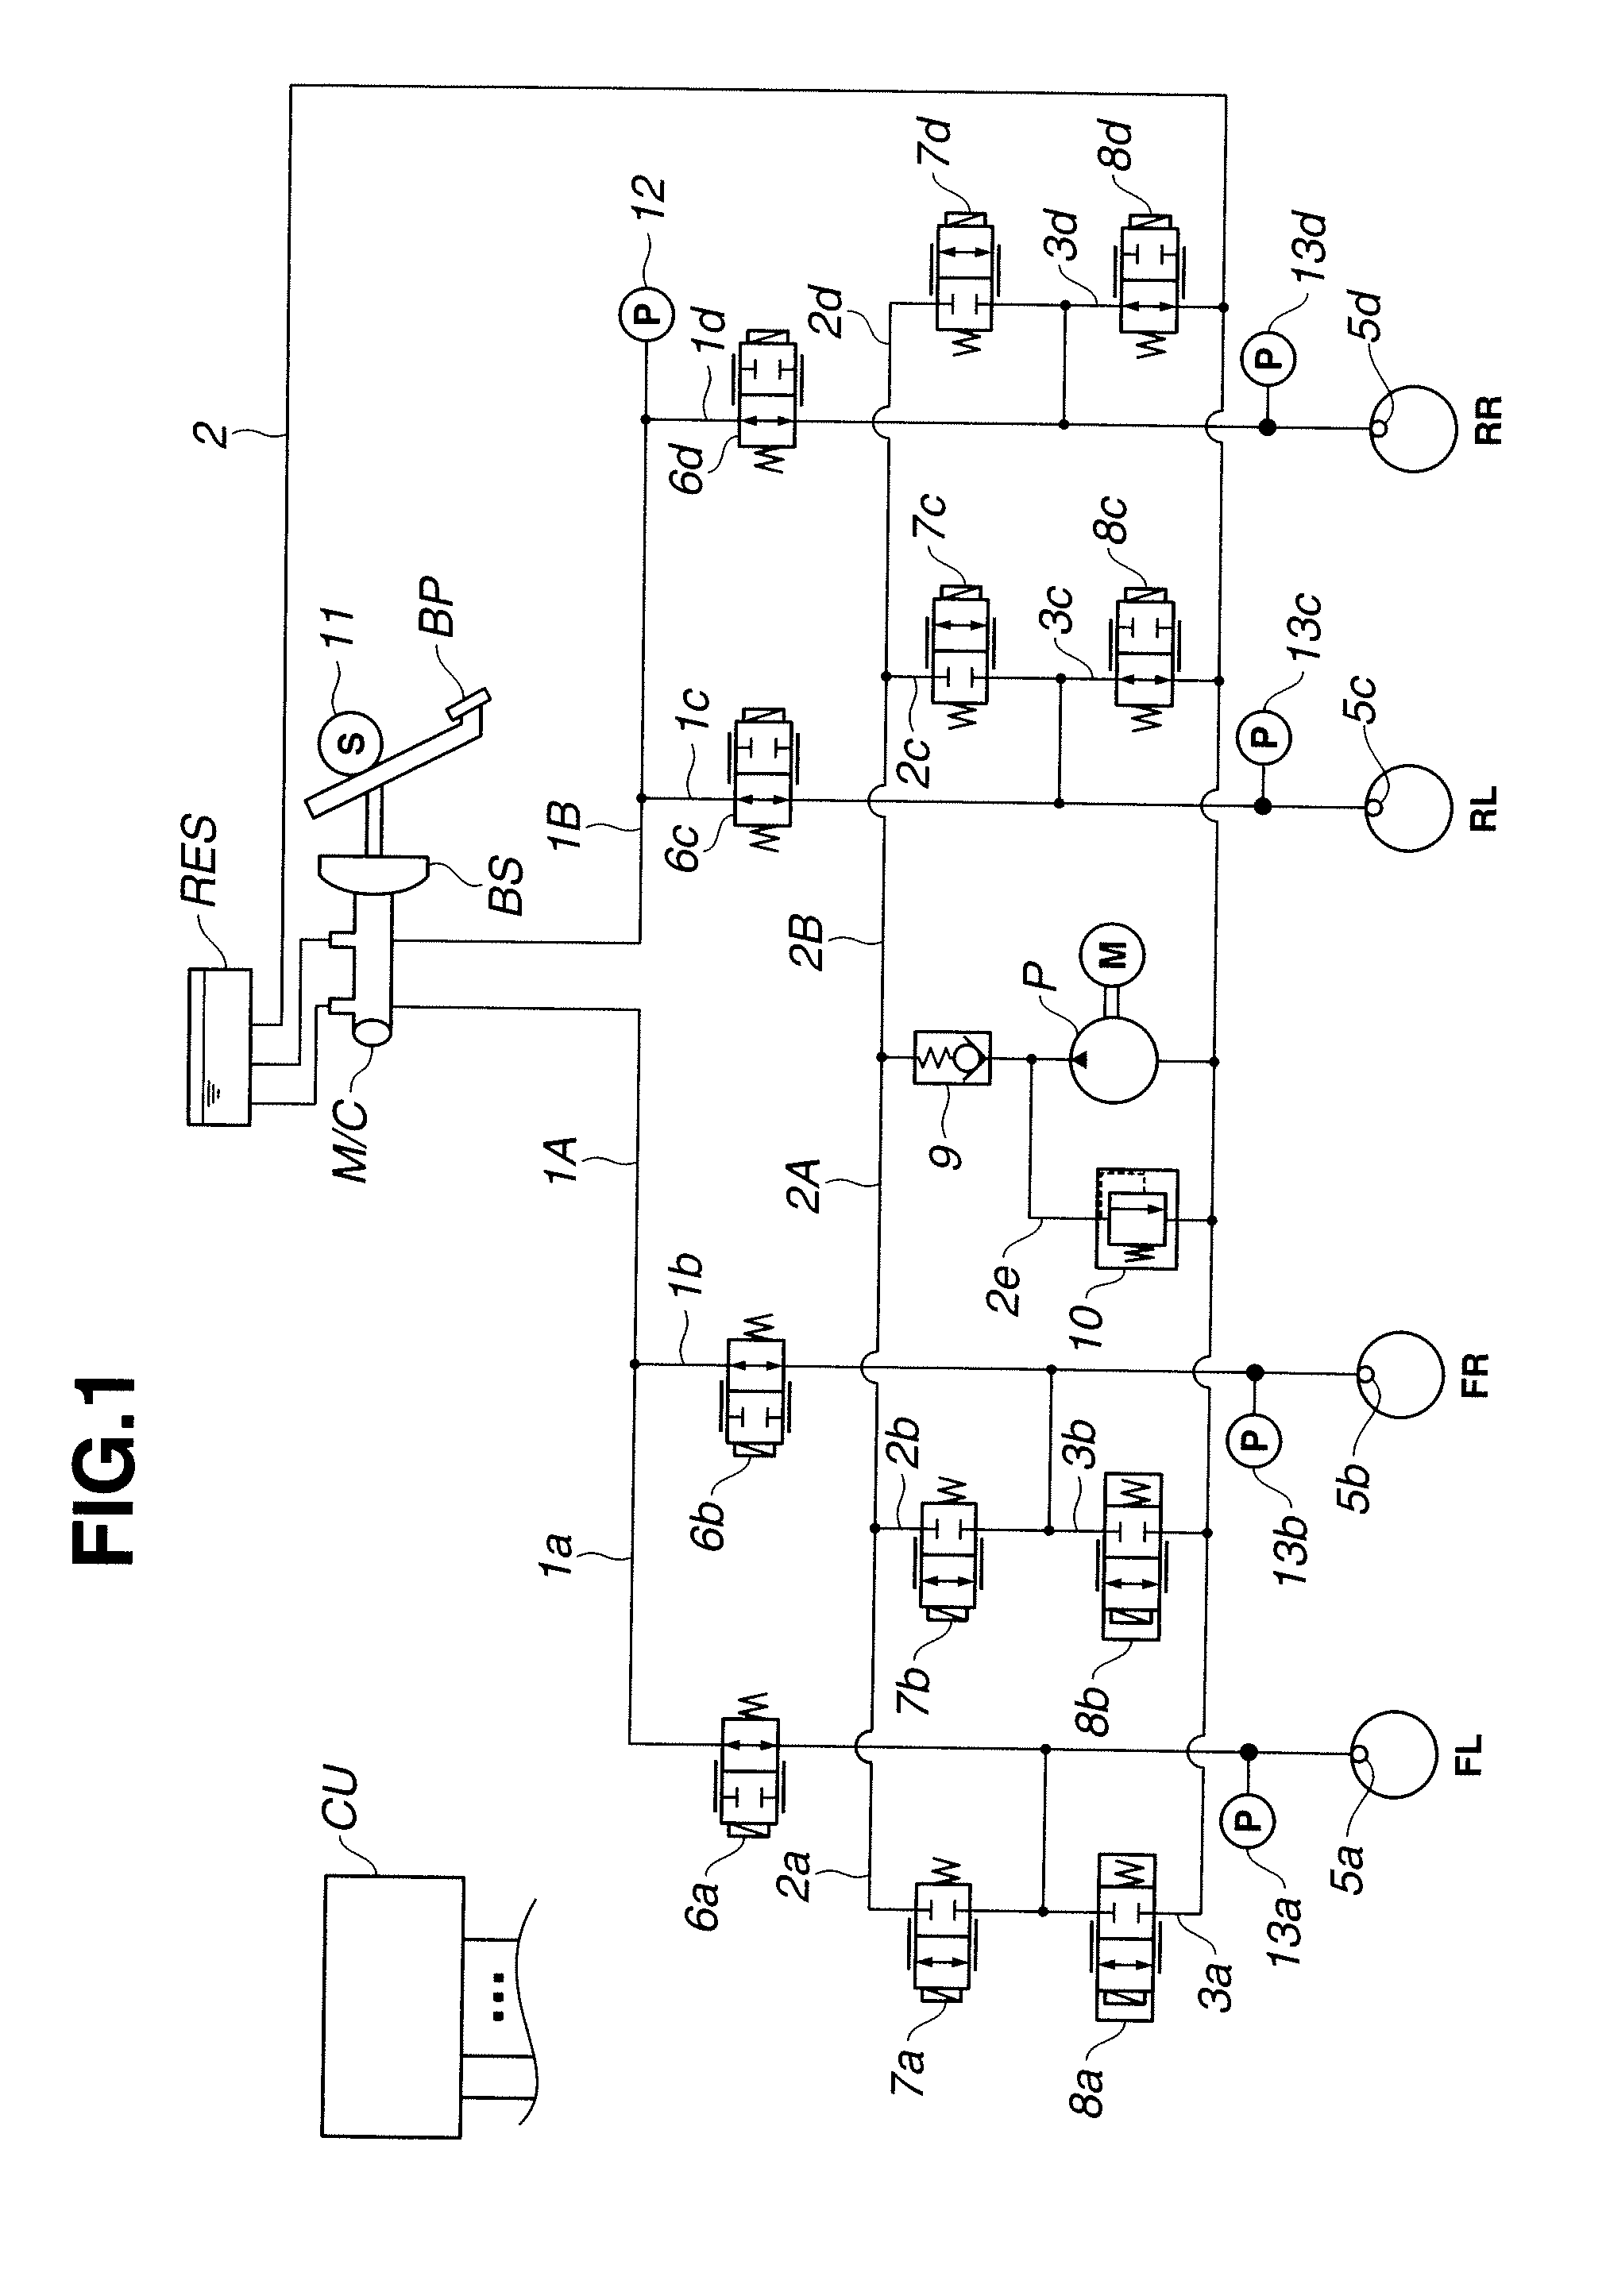 Apparatus for and method of controlling brakes